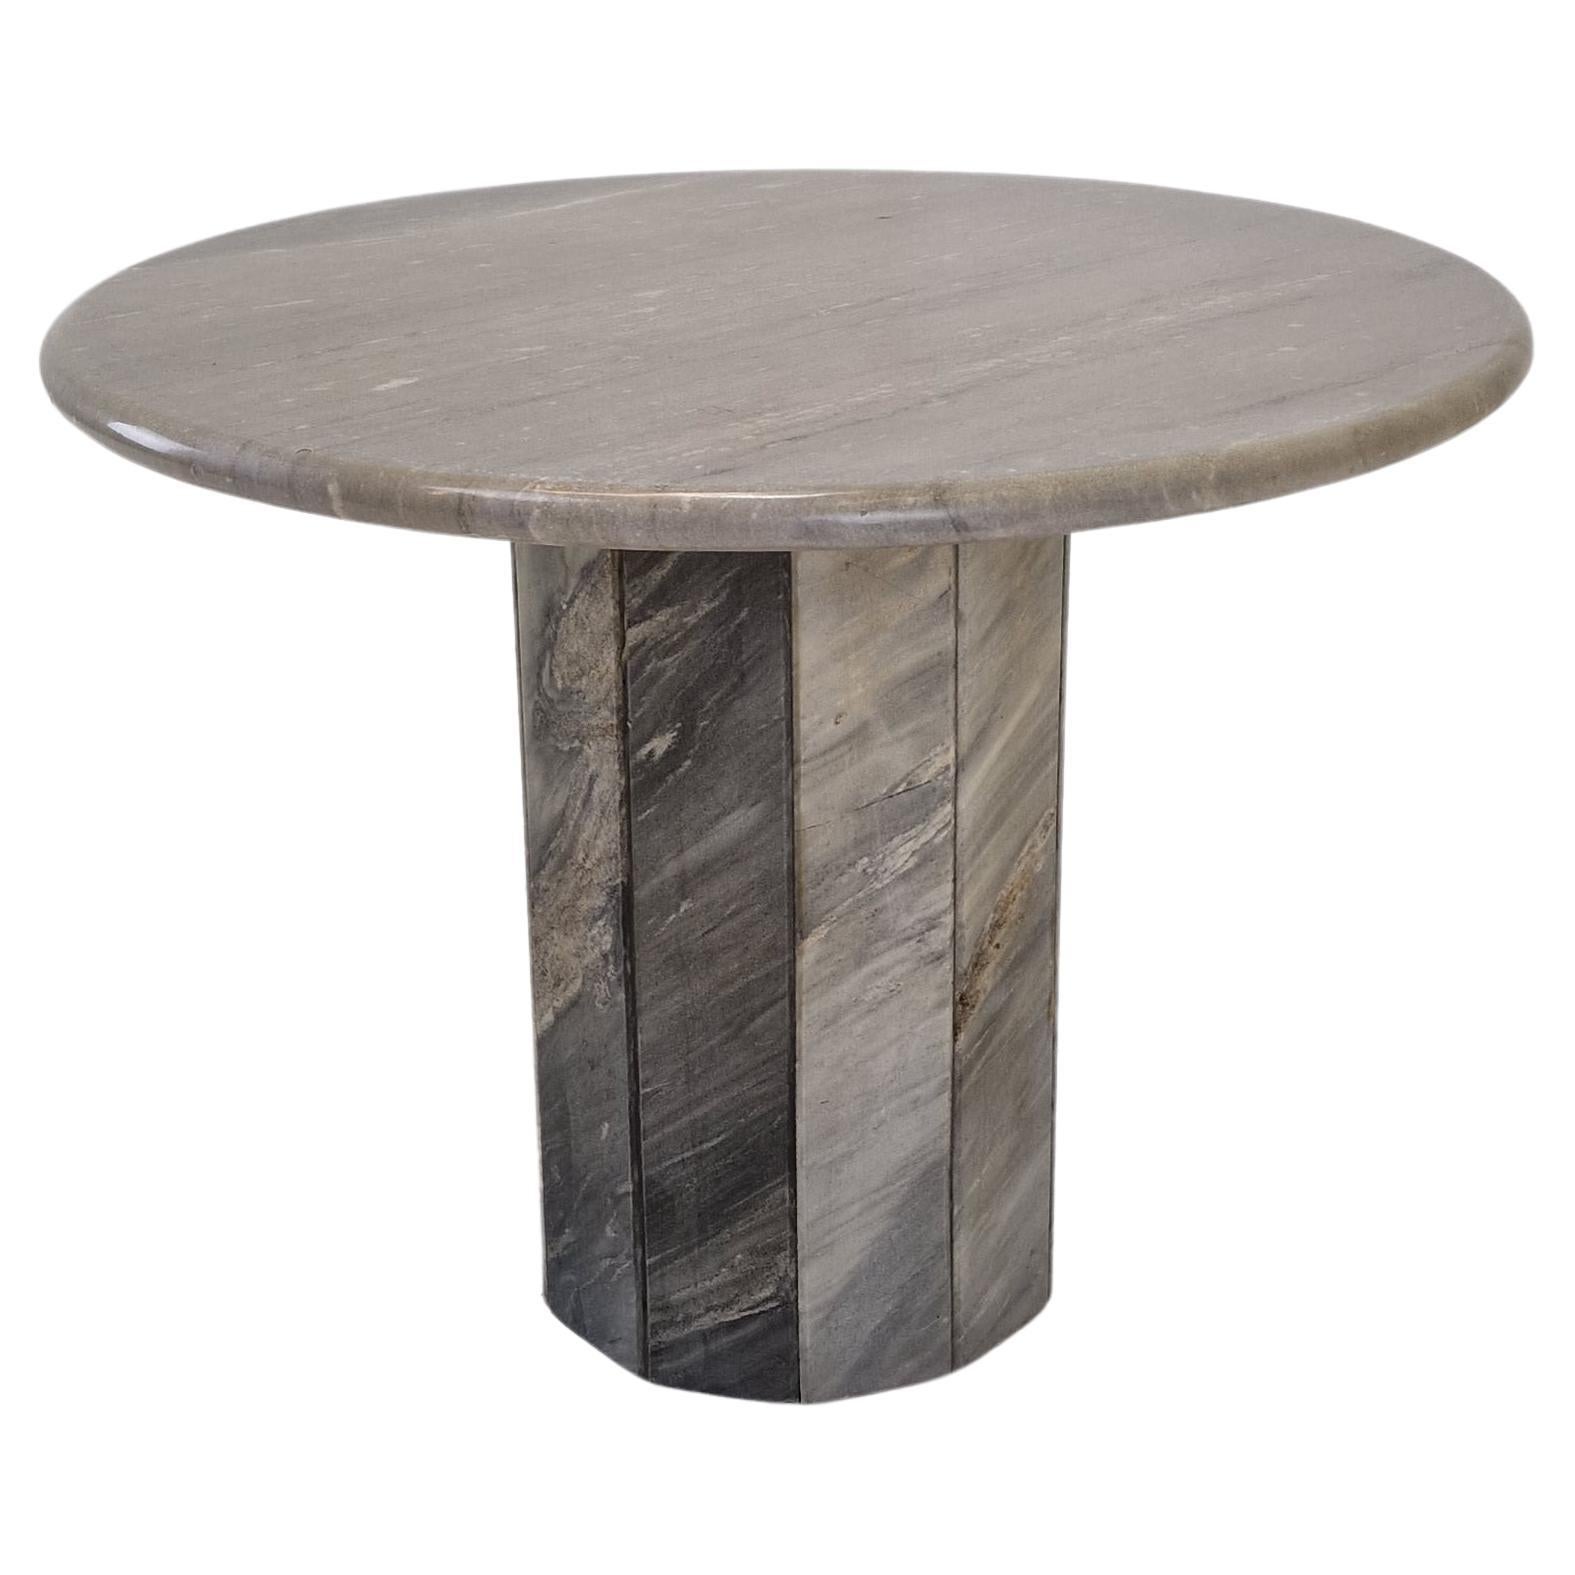 Round Italian Marble Coffee or Side Table, 1980's For Sale